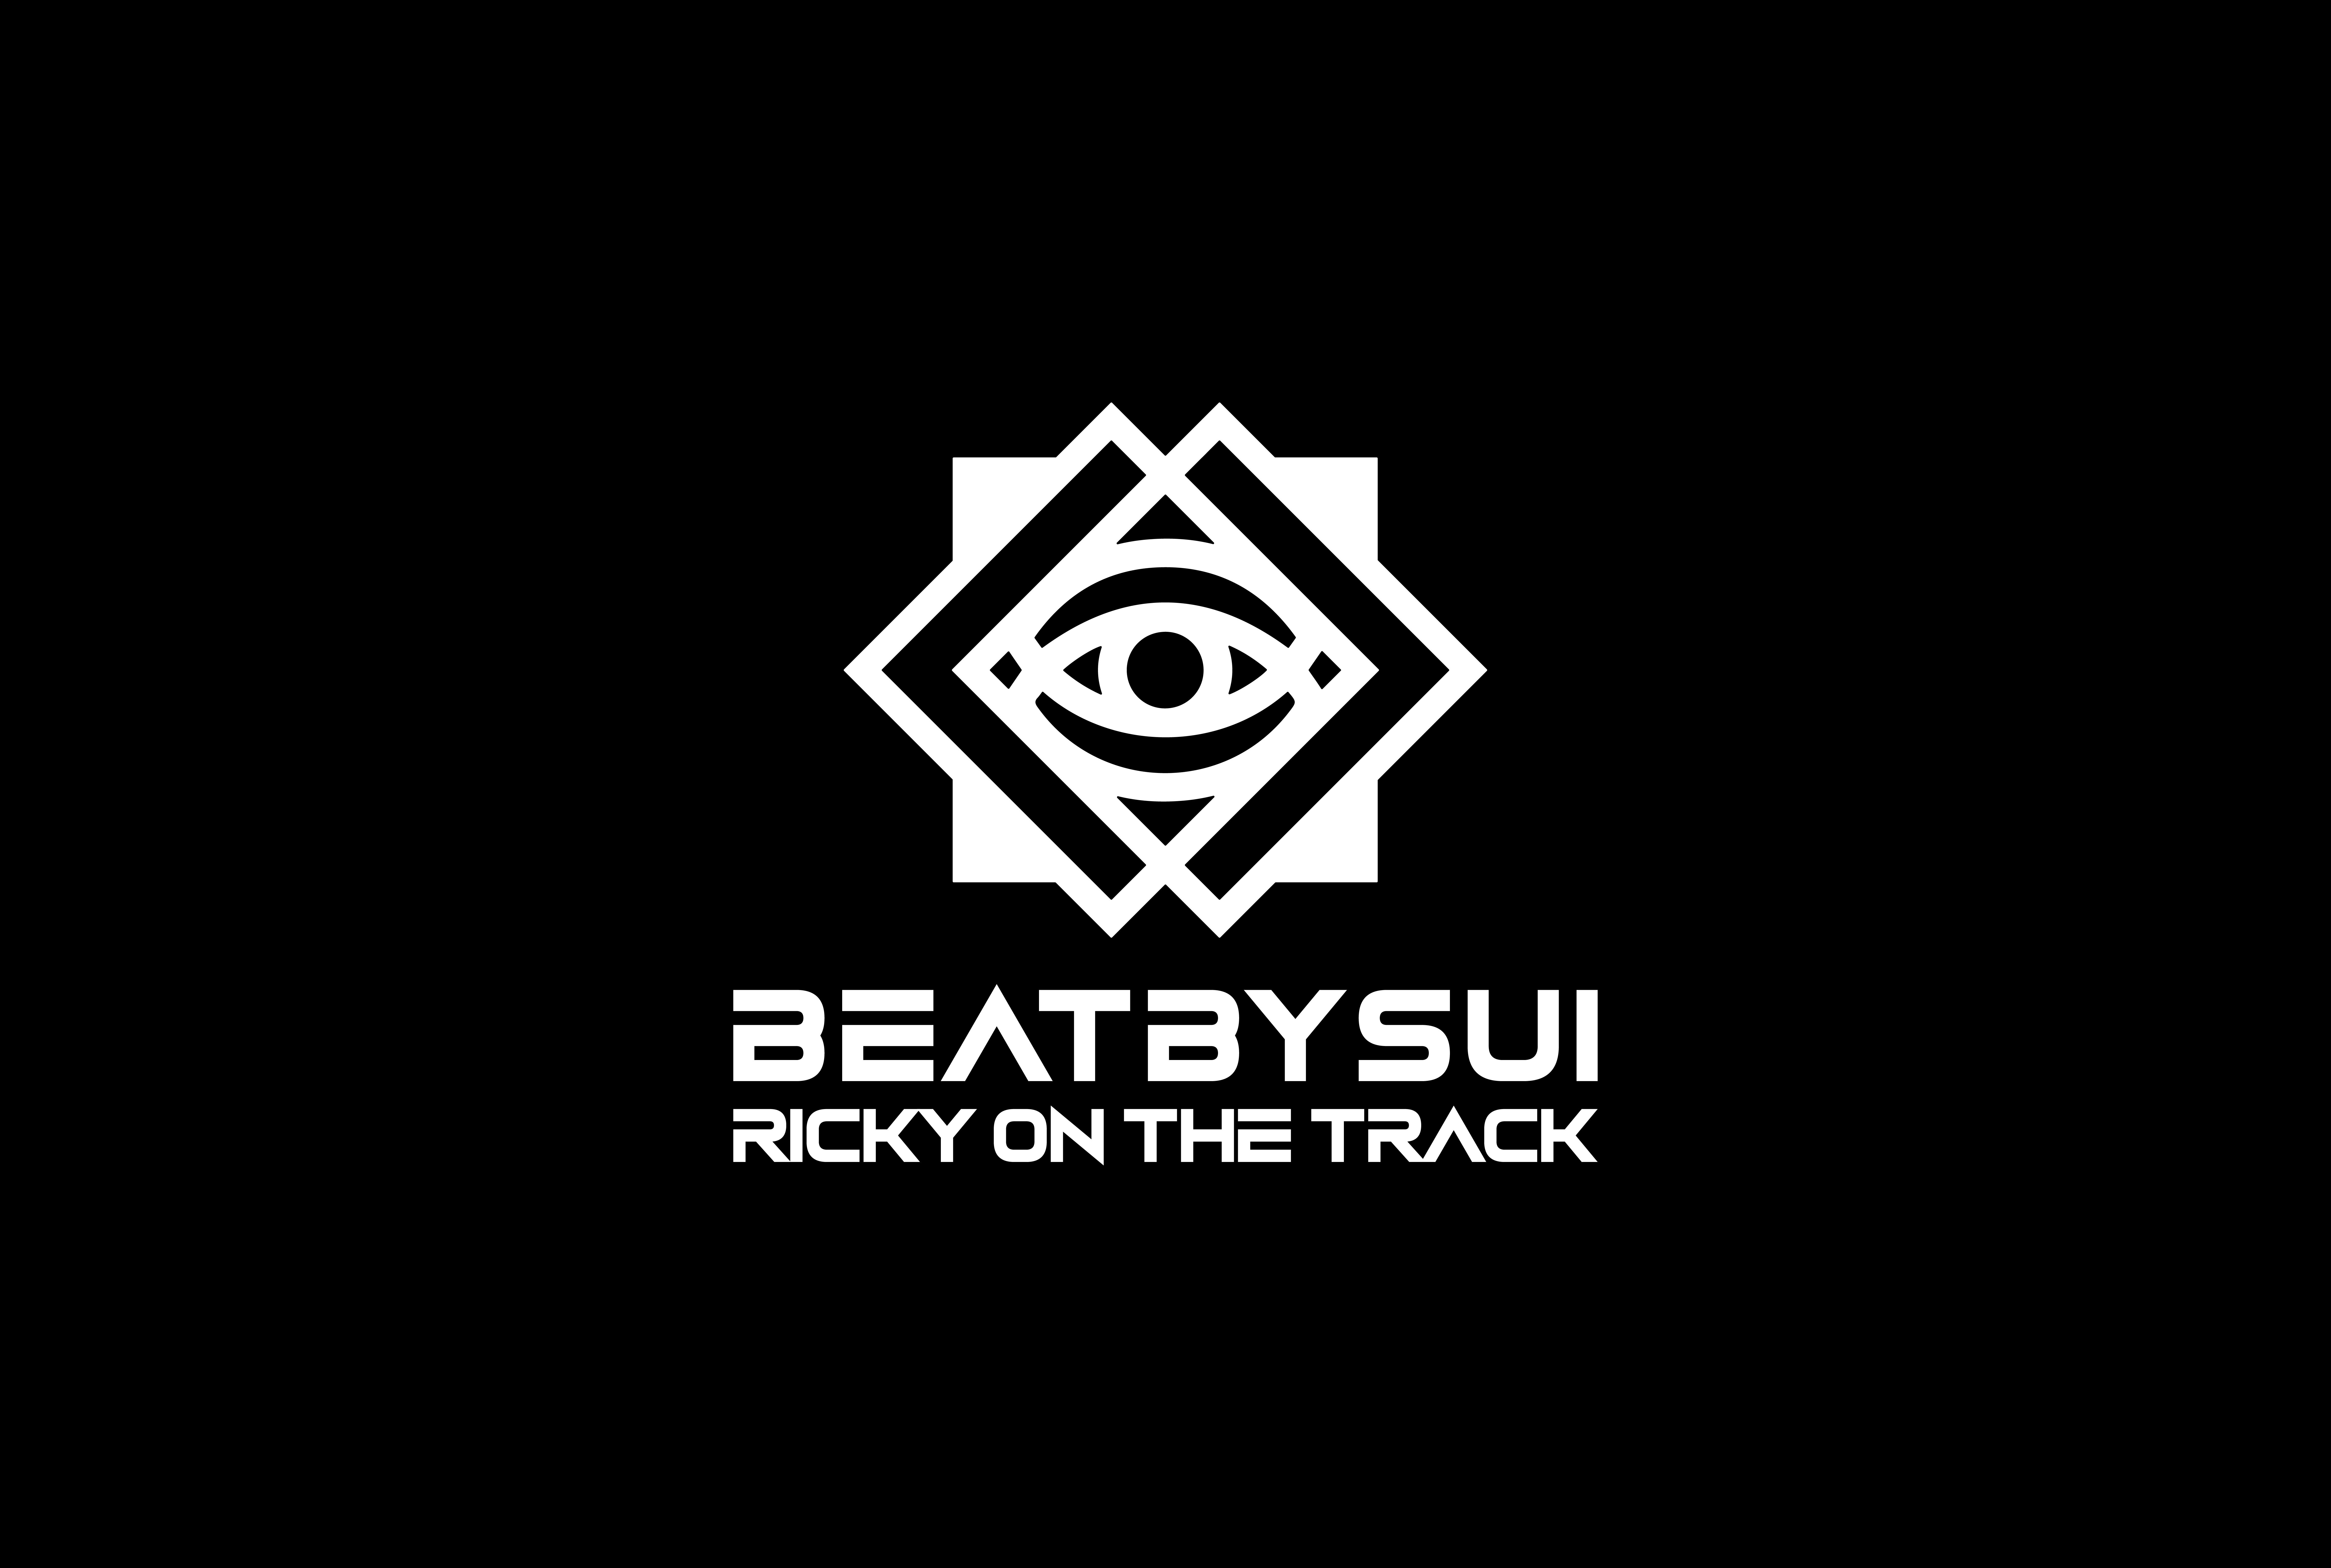 BeatBySui Is Fast Emerging As The Next Biggest Dj And Music Producer